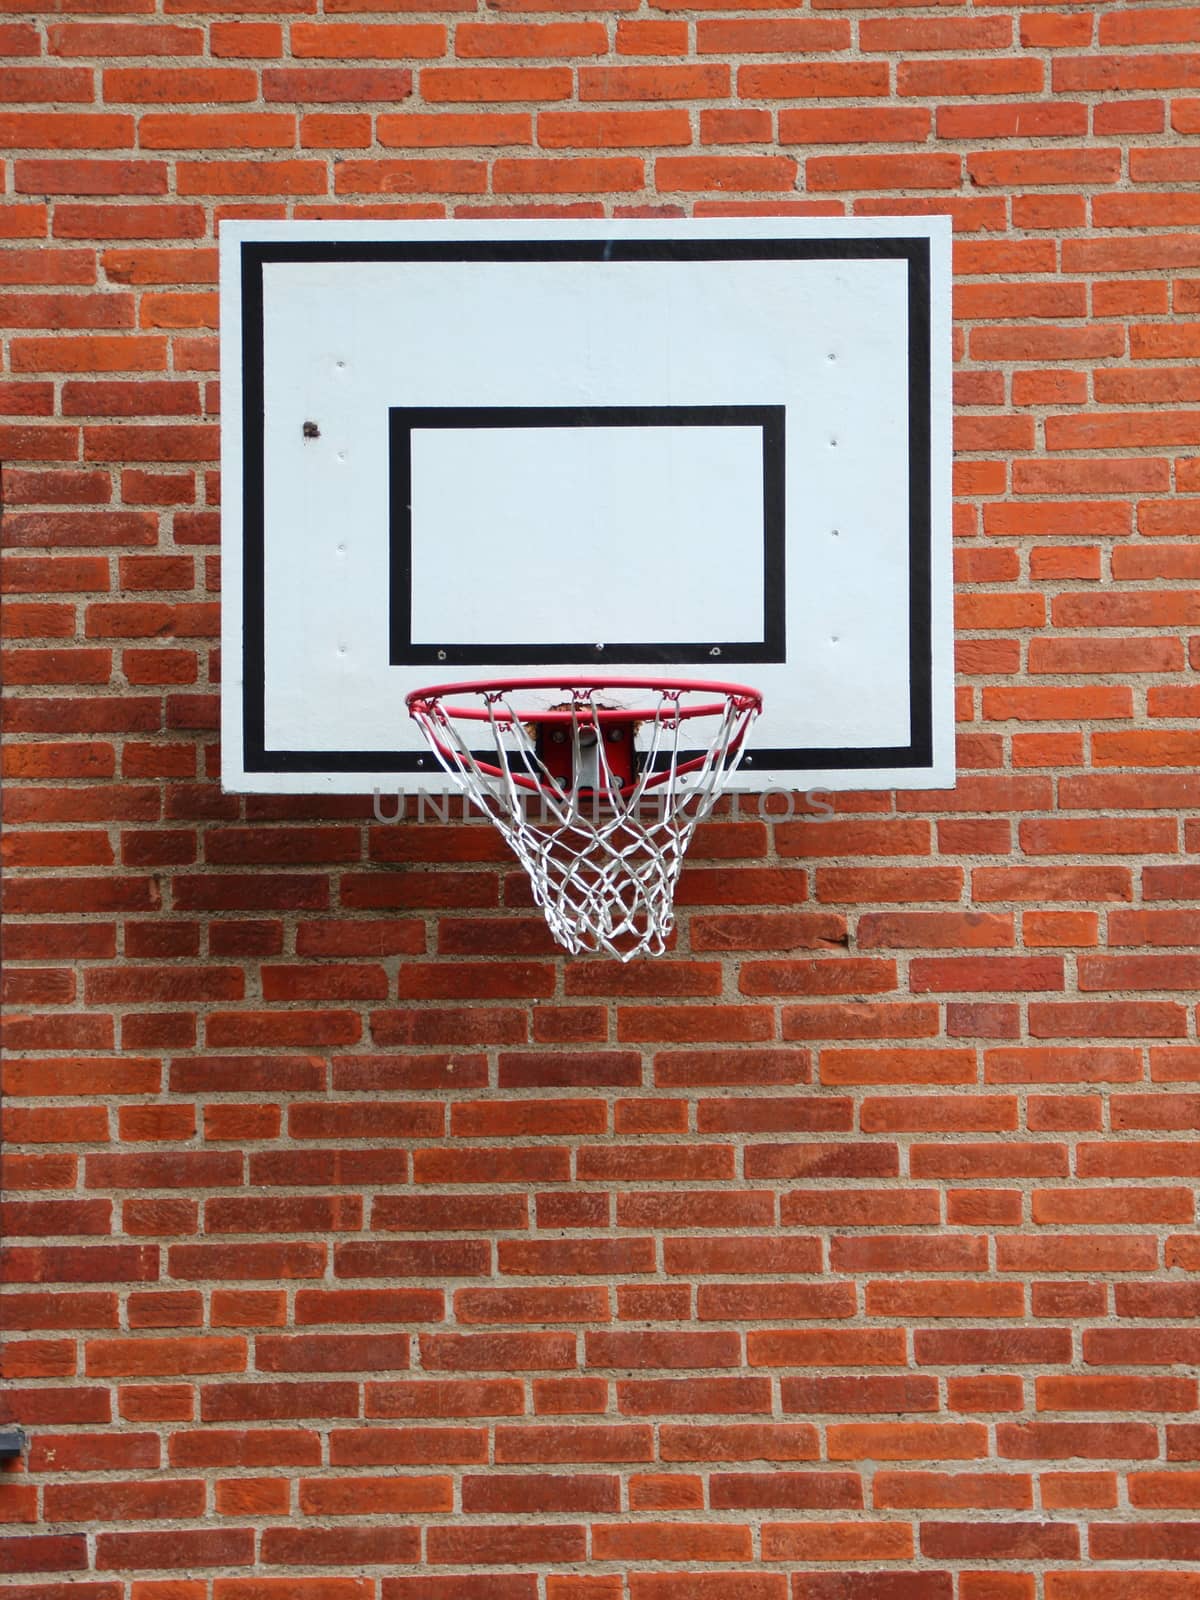 White Basketball Net Mounted on Red Brickwall by HoleInTheBox